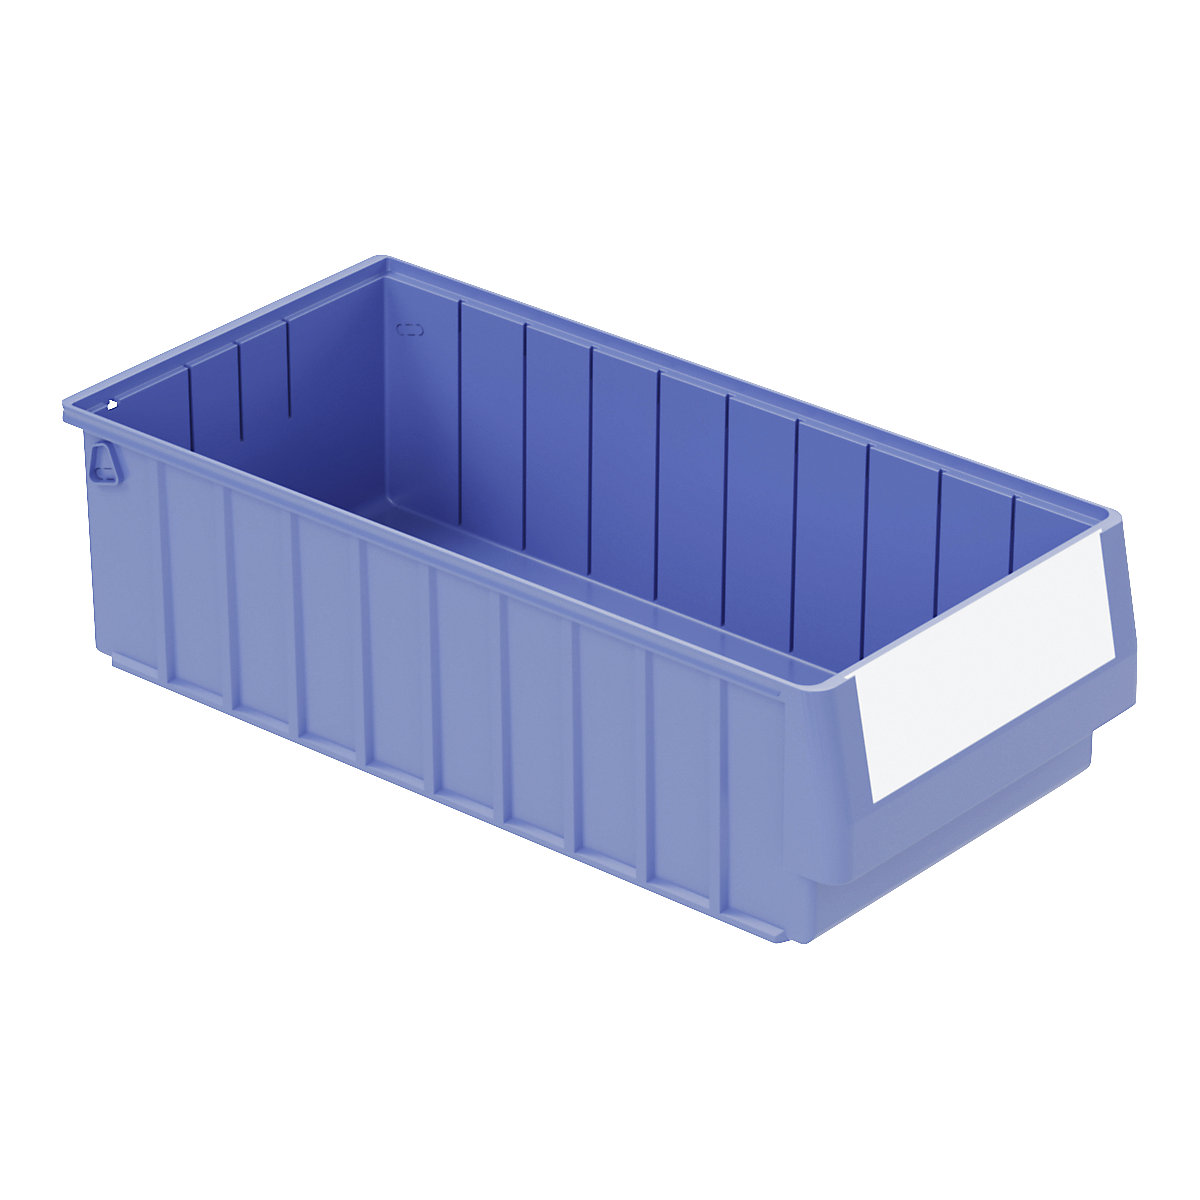 Shelf bin – BITO, made of PP, LxWxH 500 x 234 x 140 mm, pack of 6-13